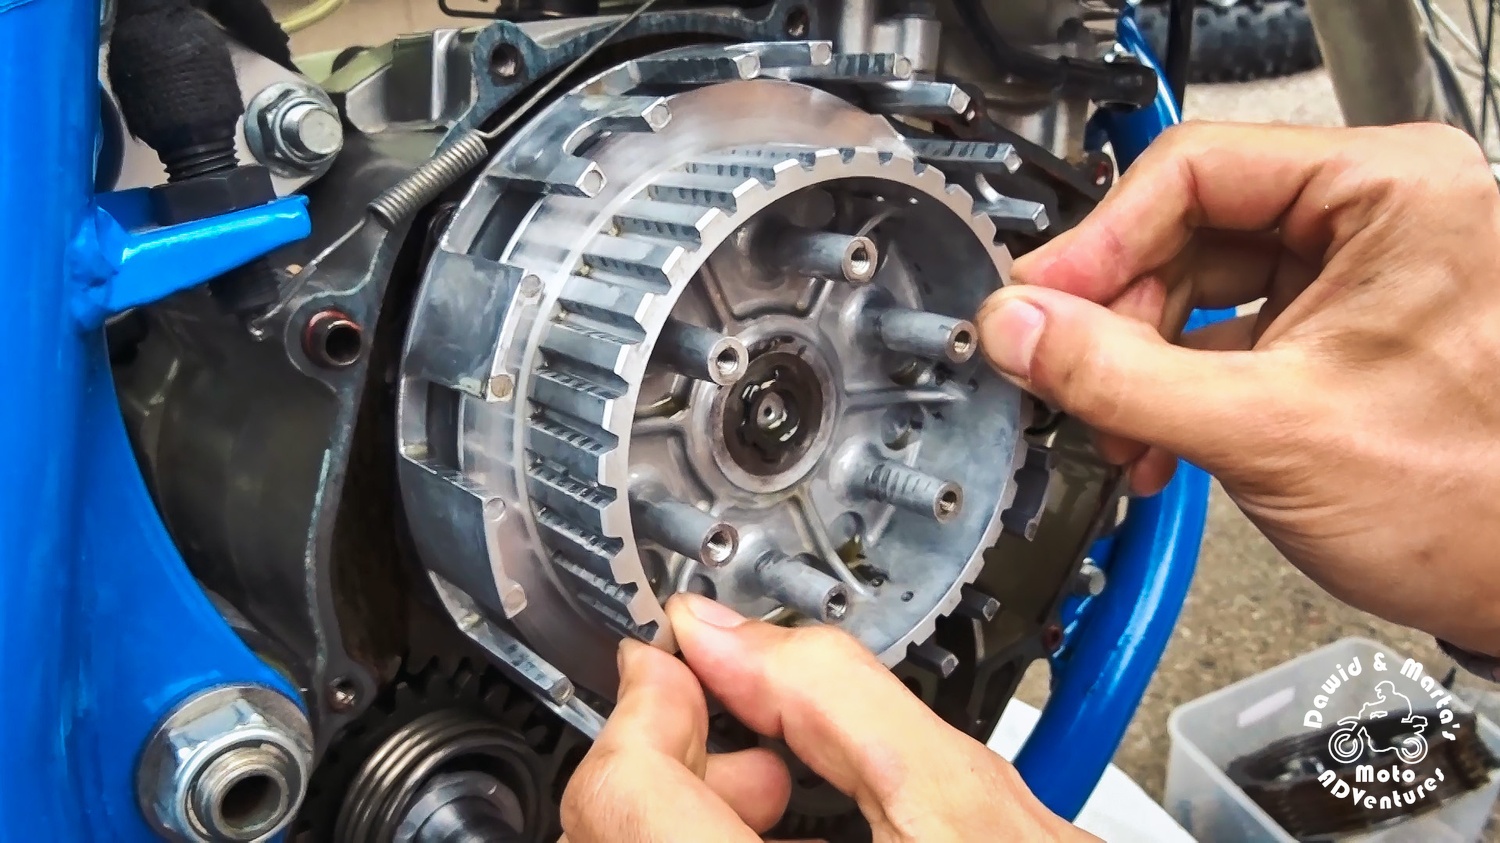 Removing the inner part of clutch basket